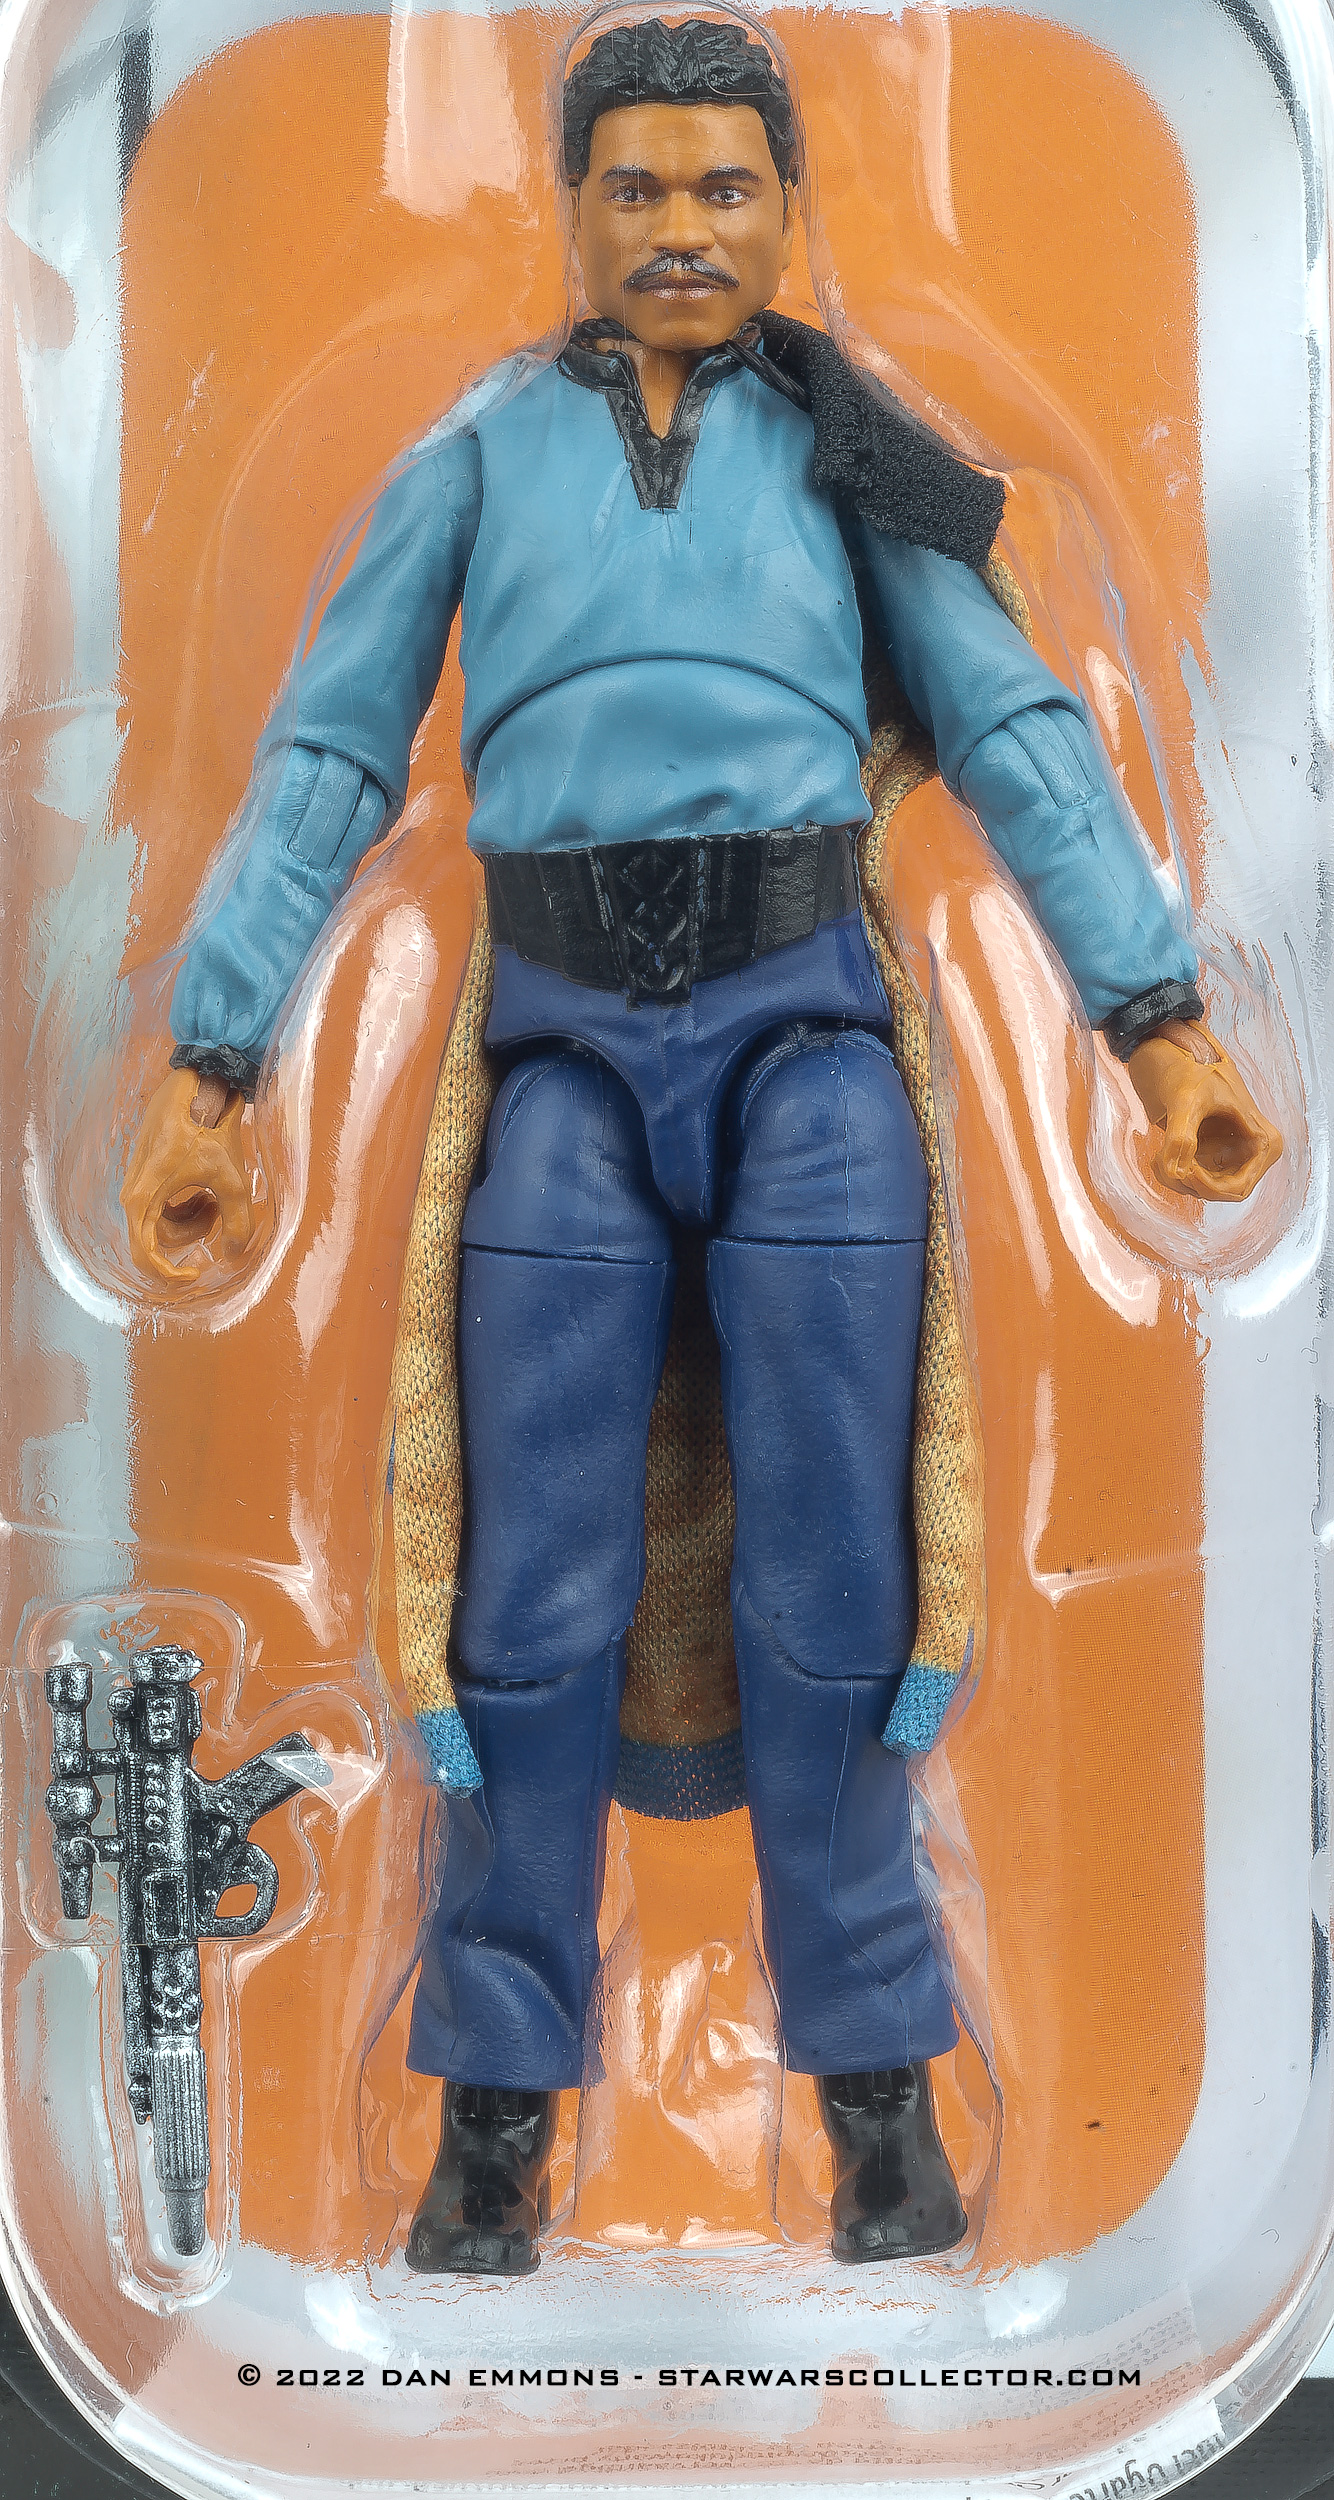 Did Hasbro Update The Gun Paint Deco For The Vintage Collection VC205 Lando Calrissian Figure?